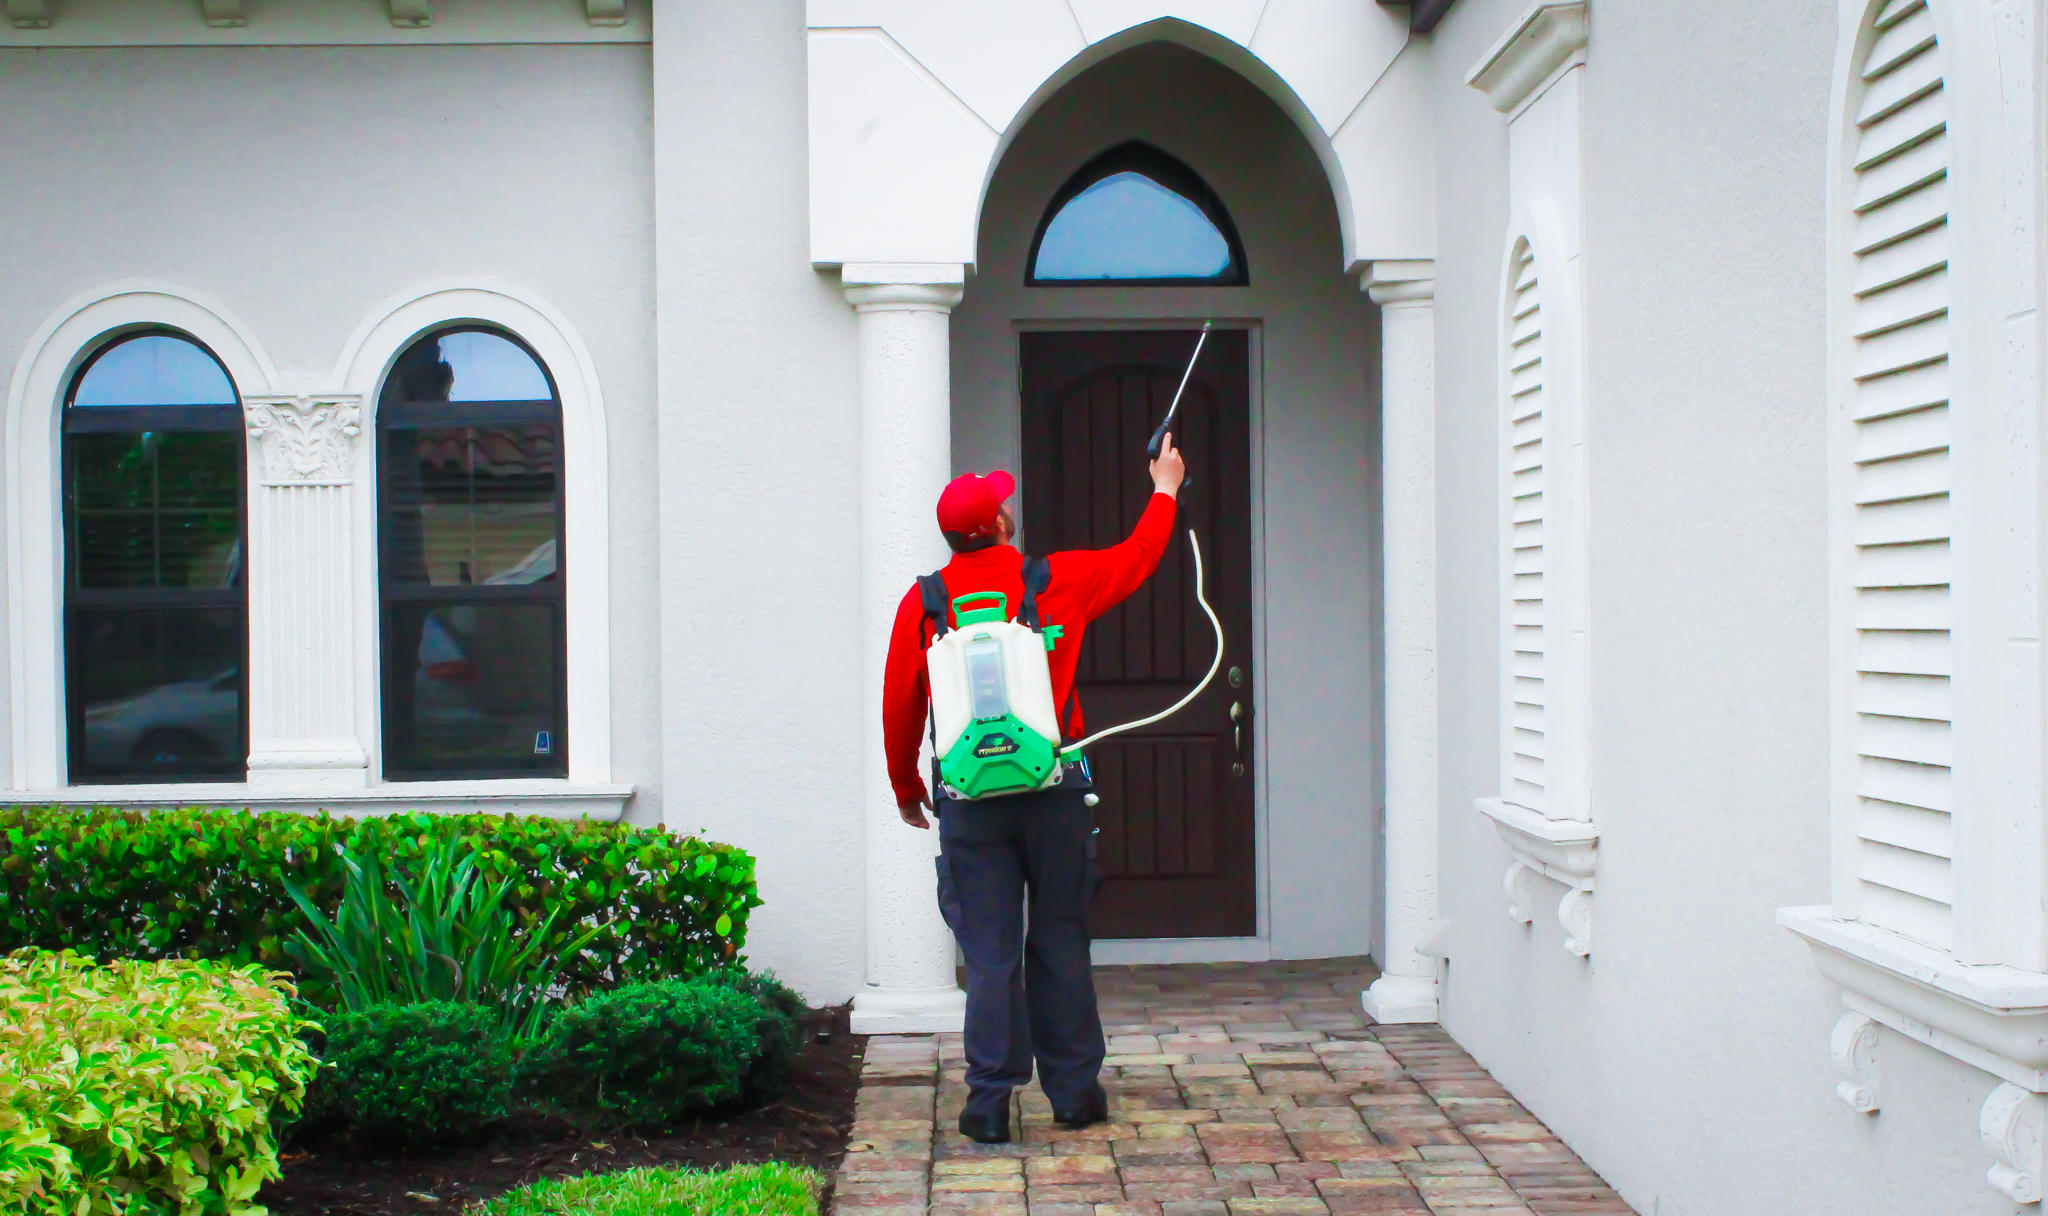 While pests can come in through little cracks and crevices, they can also march right through your front door, making themselves at home. From the obvious to the unobvious, we ensure there is a barrier to stop these unwanted house guests in their tracks! Call us today for a free quote on protecting your home.